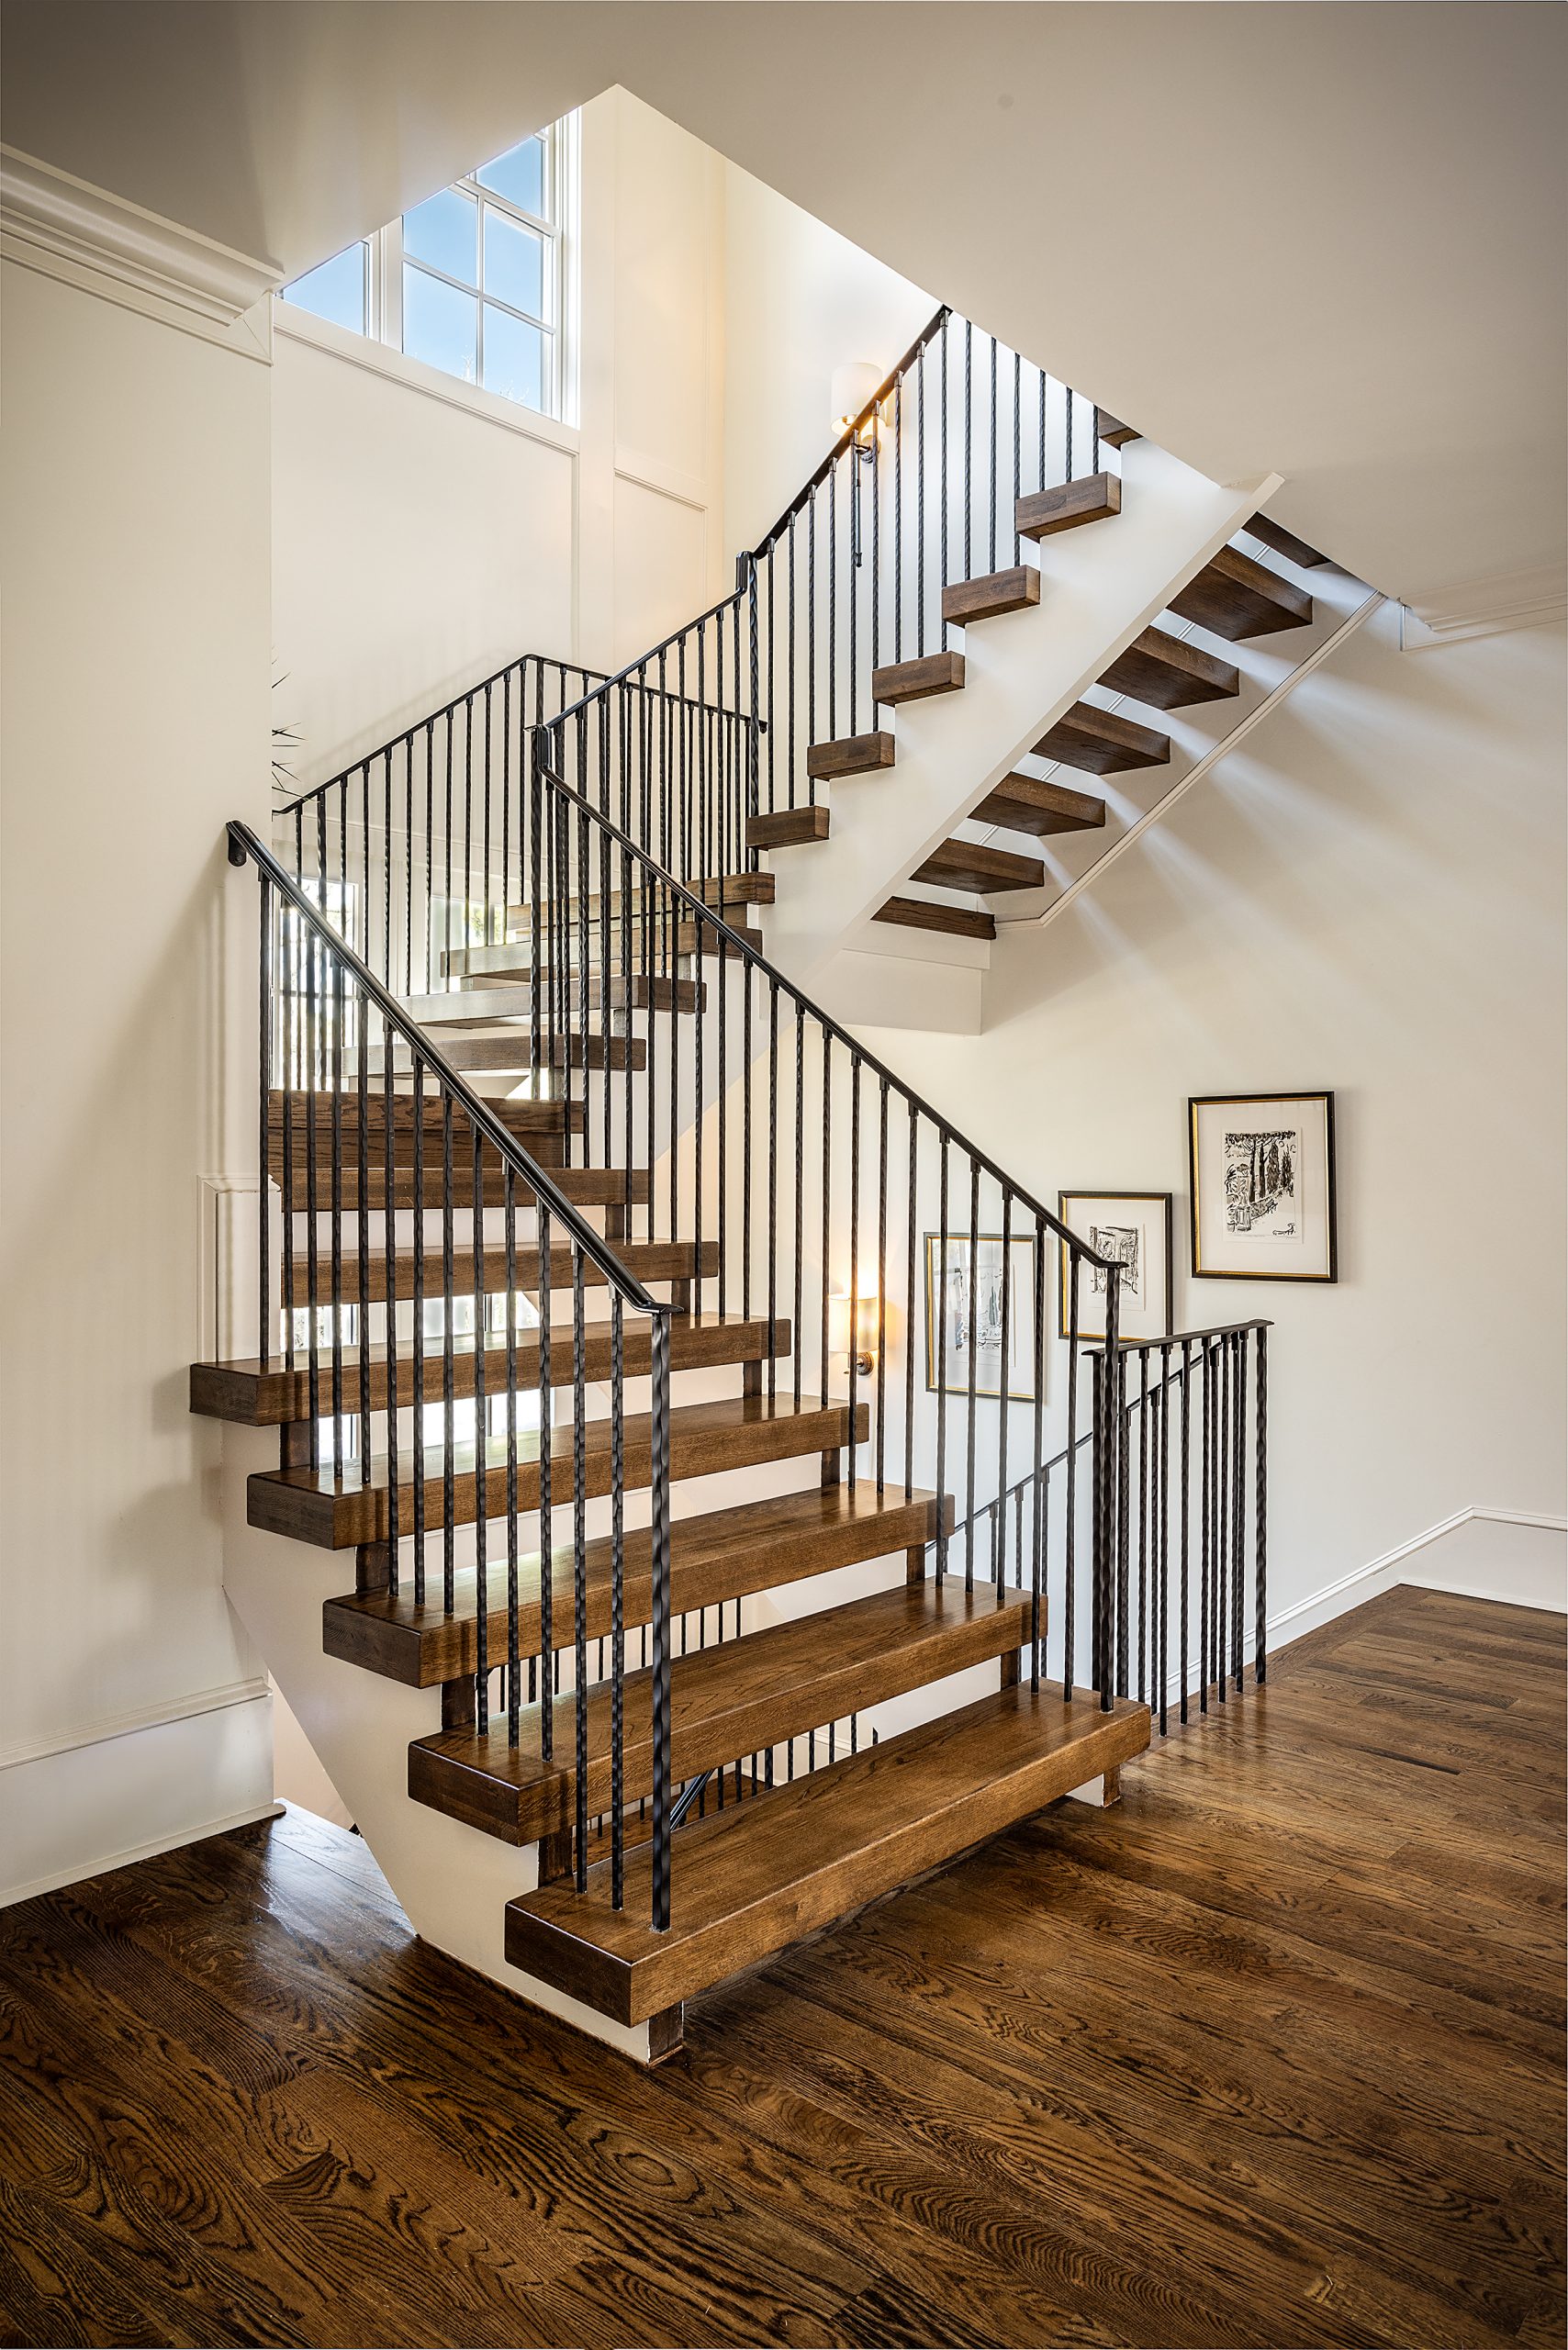 The three-story stairway adds architectural interest and juxtaposition of angular elements to the design of the home.
